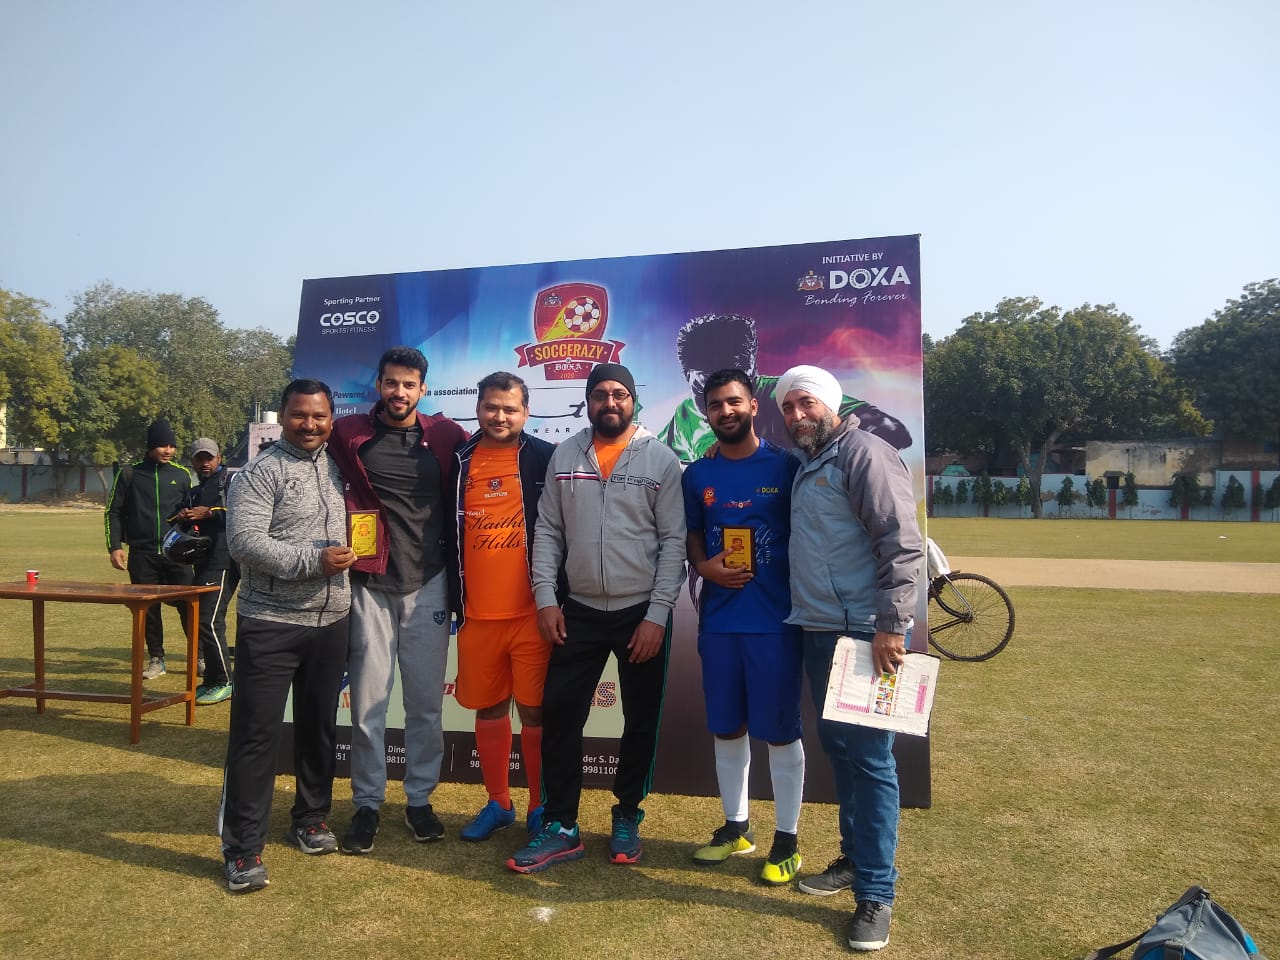 Soccerazy kicks off 4th Edition - Day 1 - 5th Jan, 2020<br>
<br>
It's time to kick off 2020 with action that's aplenty<br>
<br>
The fouth edition of Scoccerazy by DOXA kicks off on 5th January 2020. Warm up to the Doxaitement!